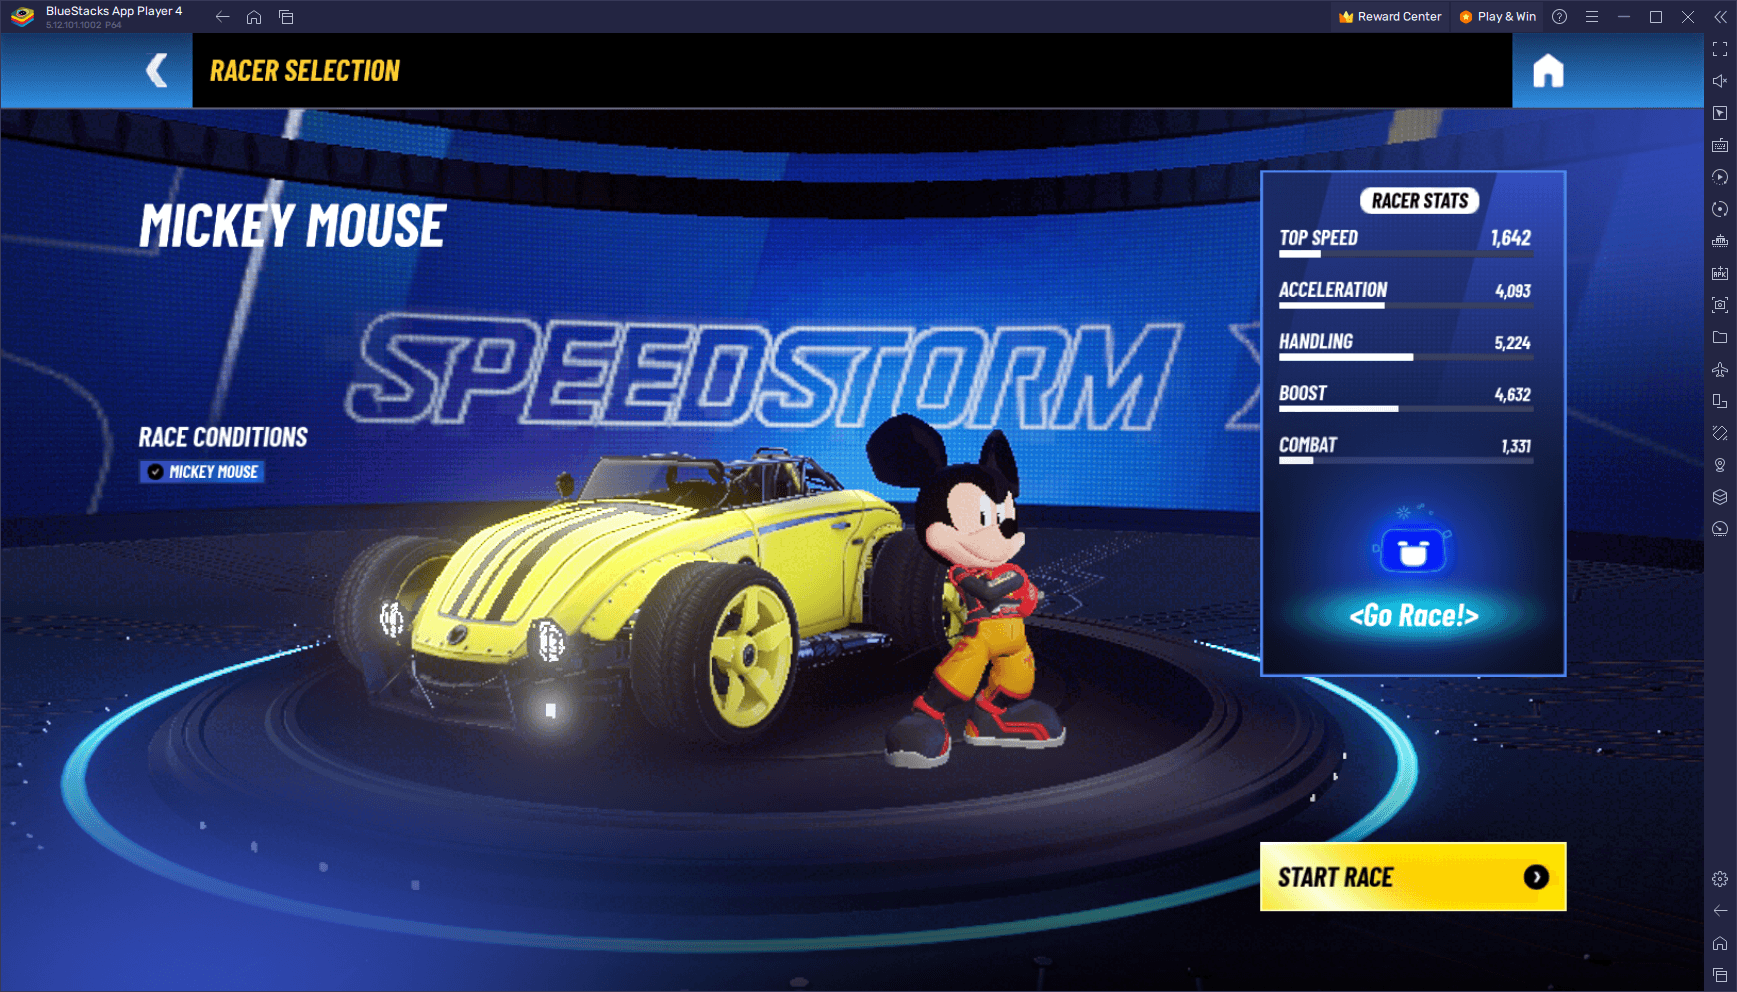 Disney Speedstorm Soft Launch Live: How to Play on PC and from Any Region with BlueStacks